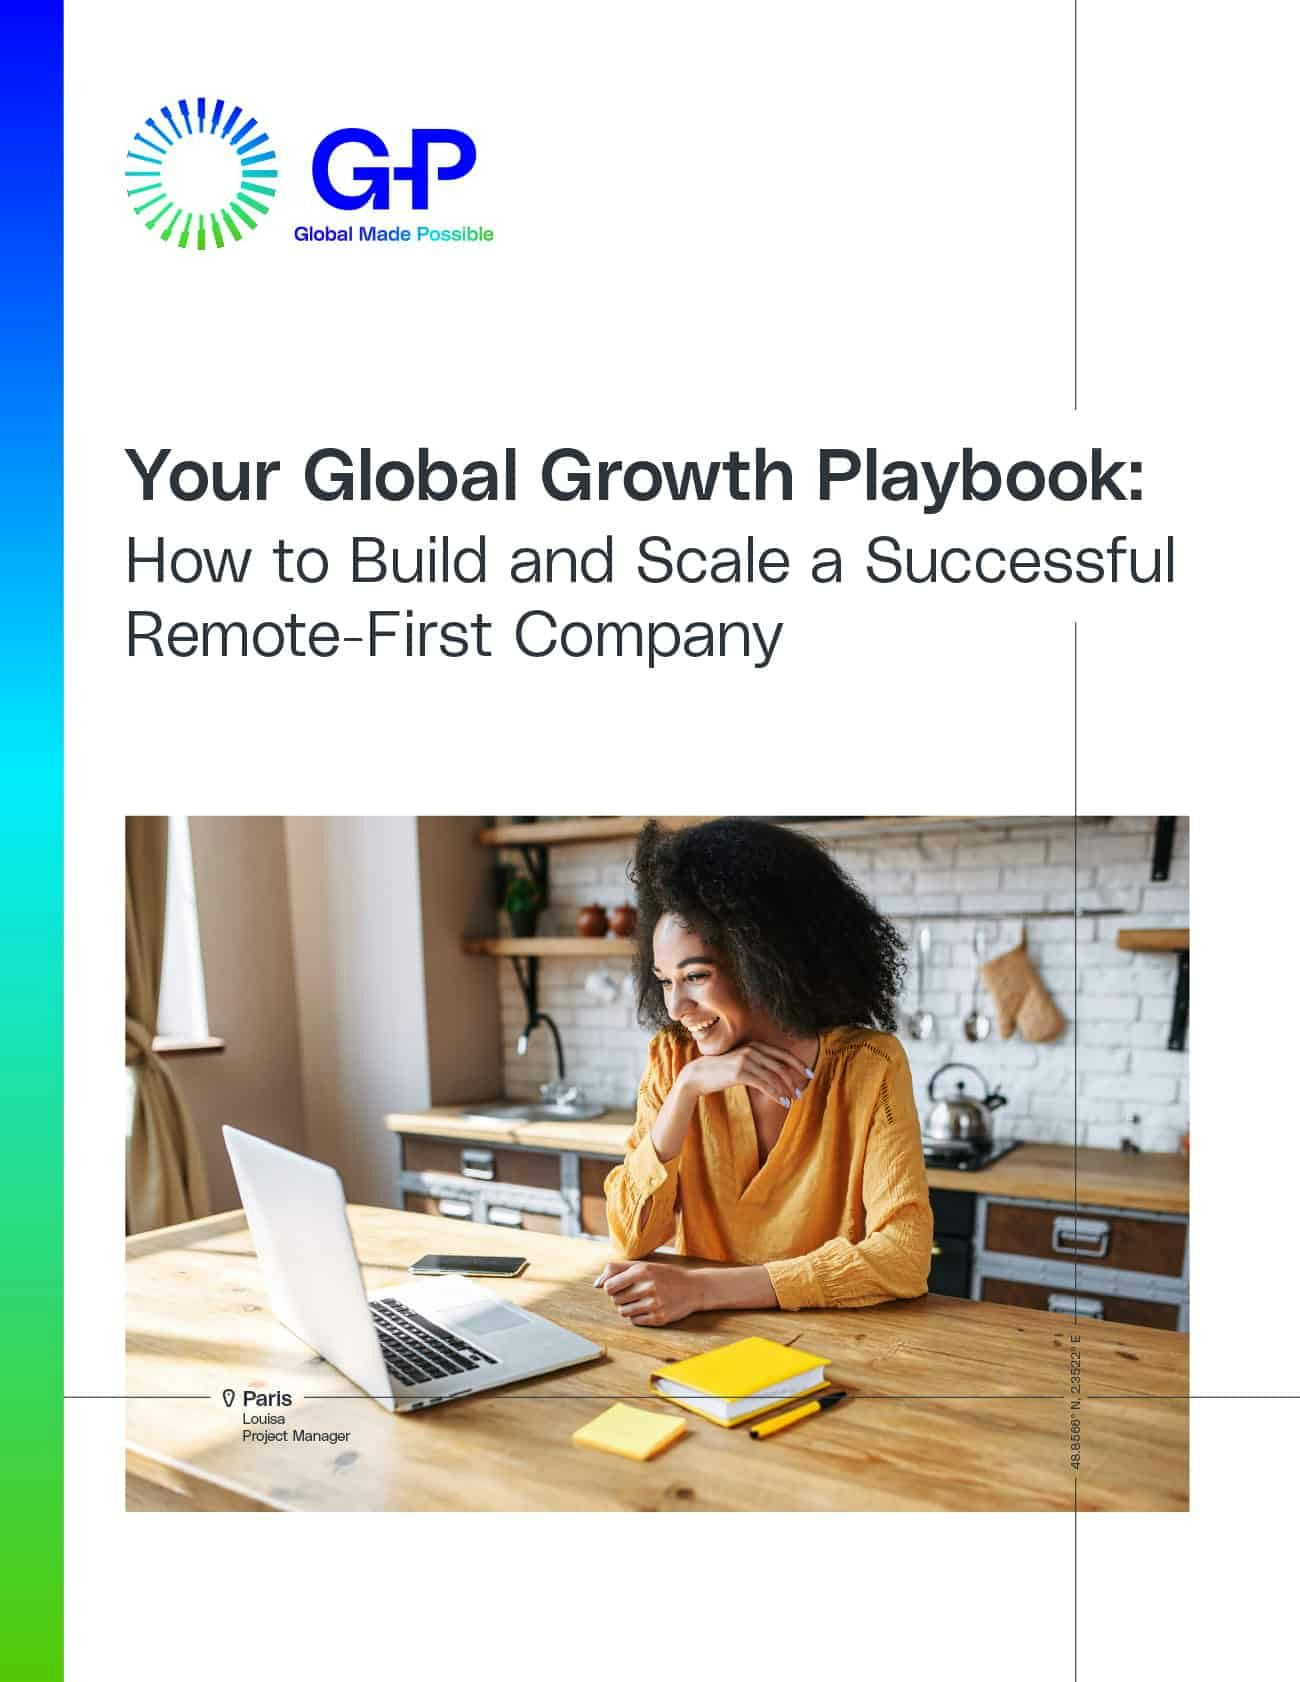 remote-first-playbook-global-growth-g-p-cover-1-1.jpg